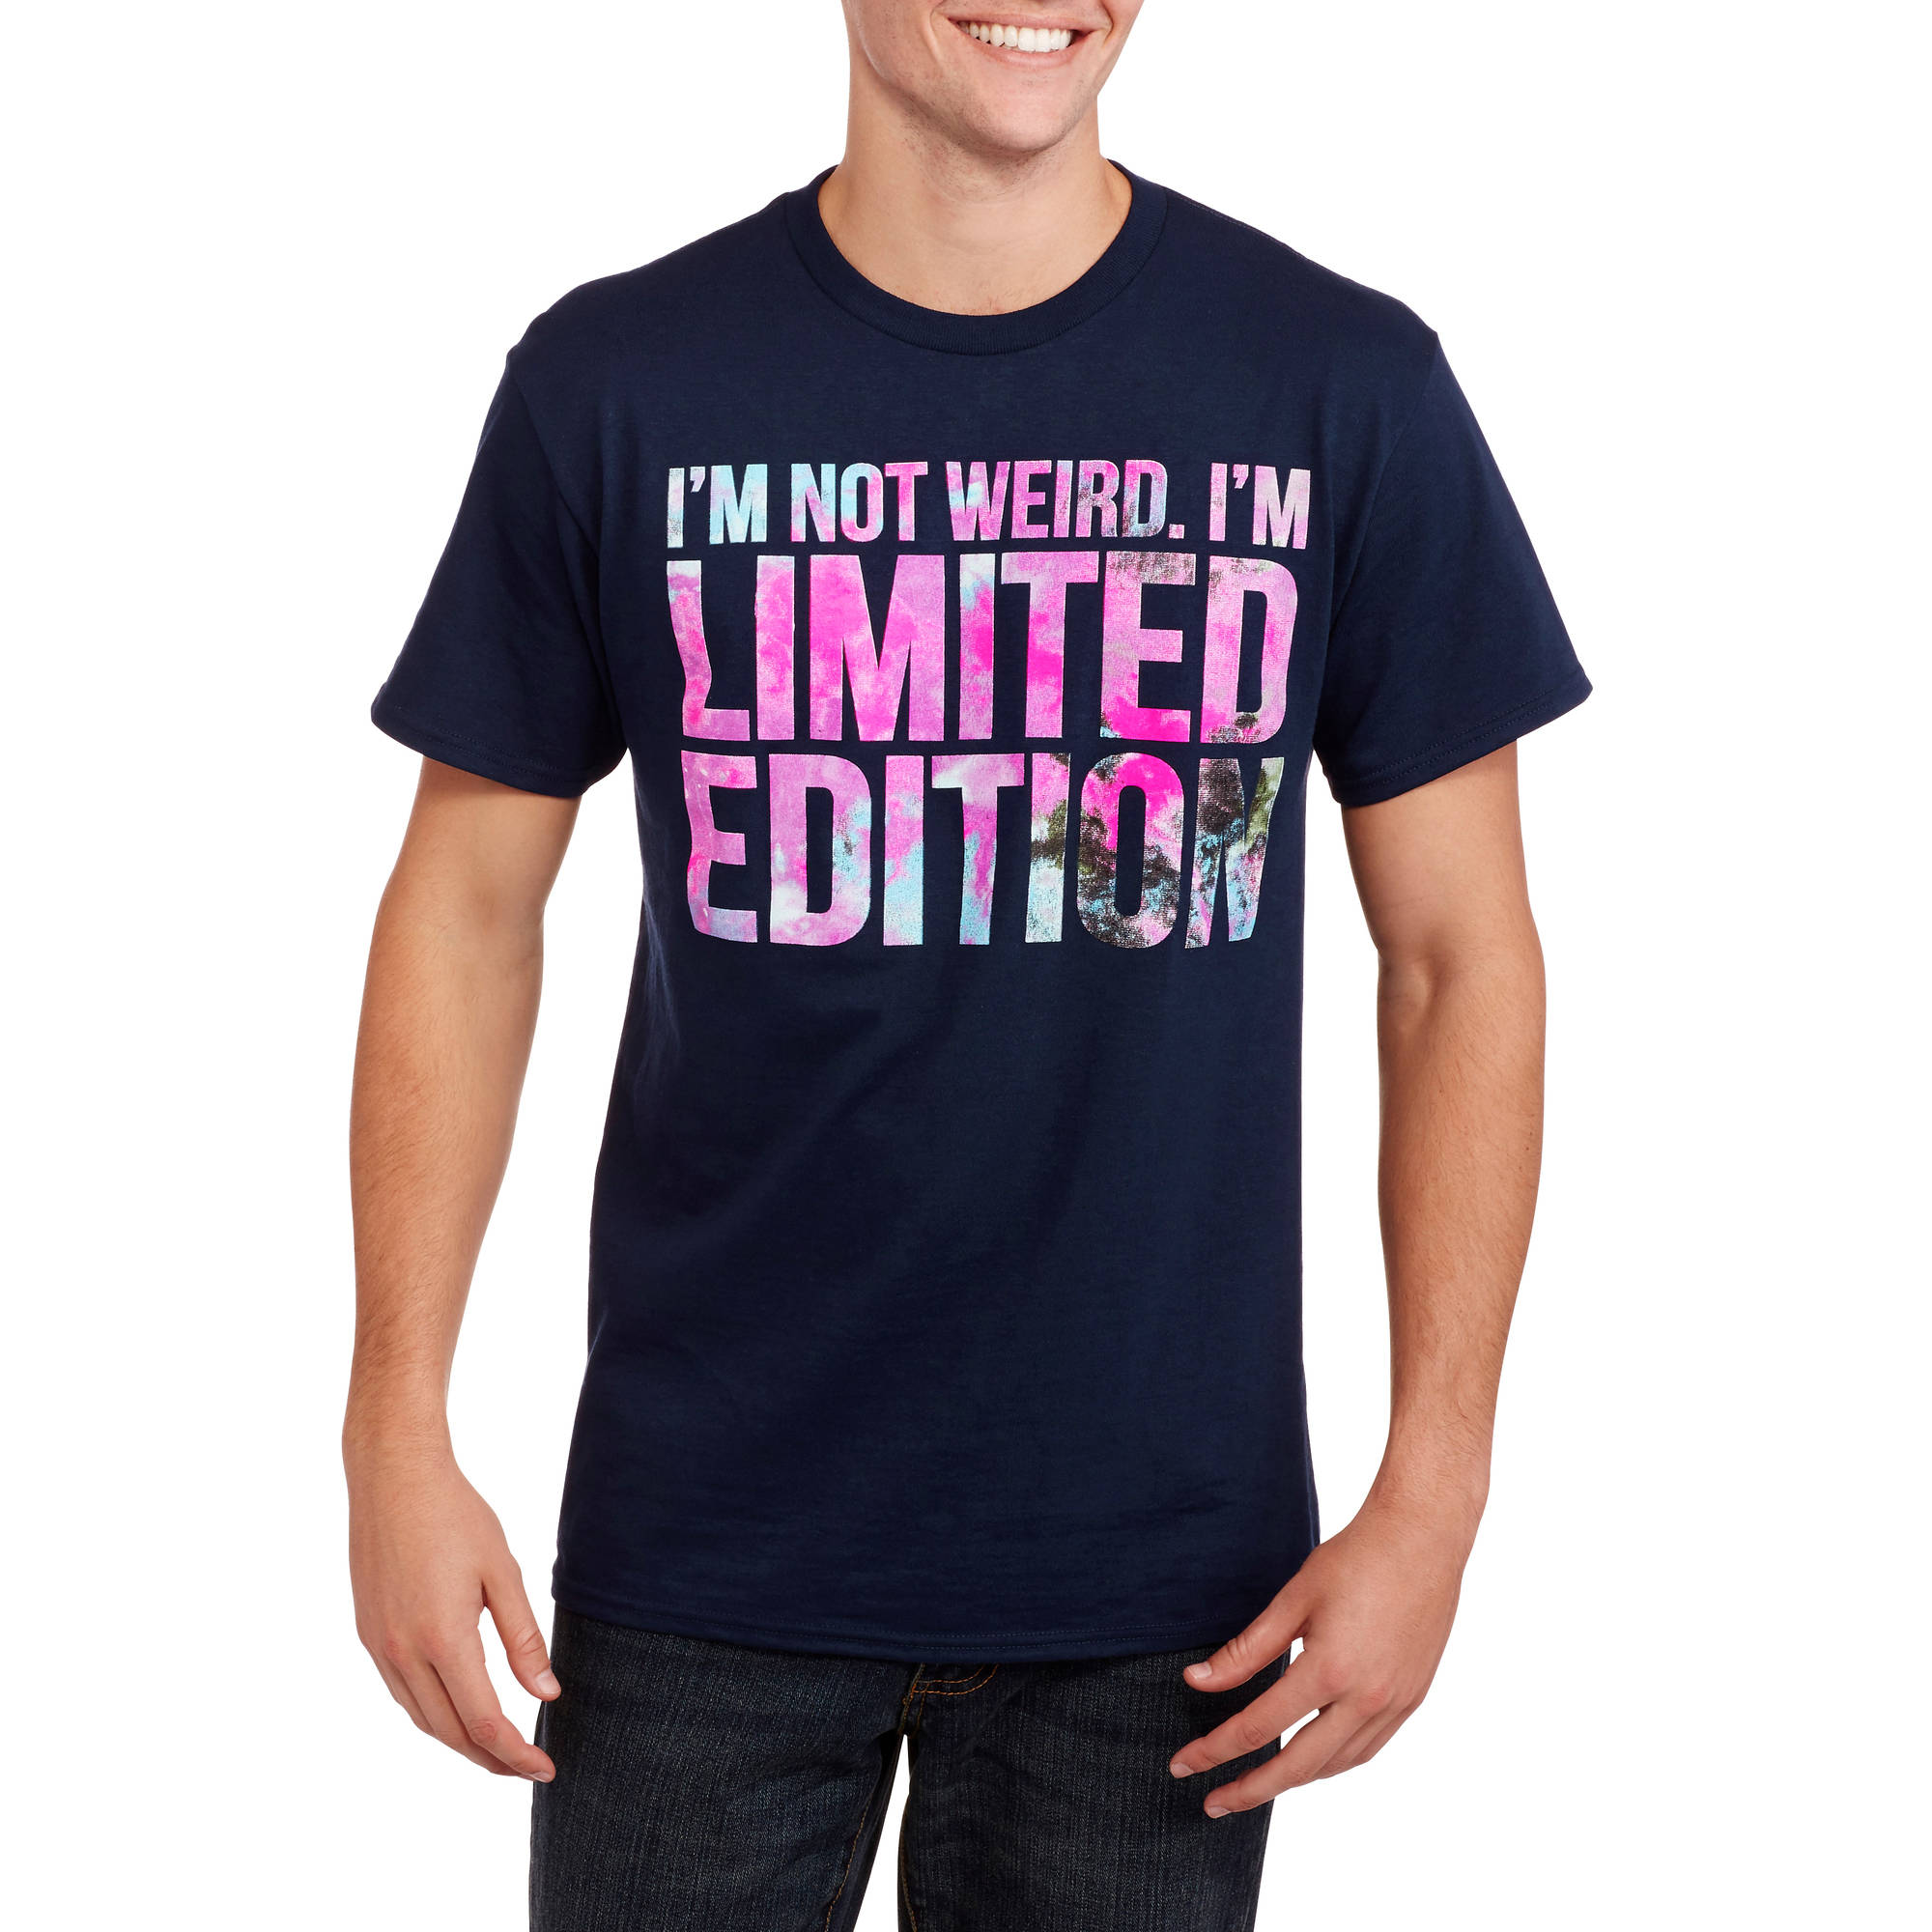 I'm Limited Edition Men's Graphic Tee - image 1 of 2